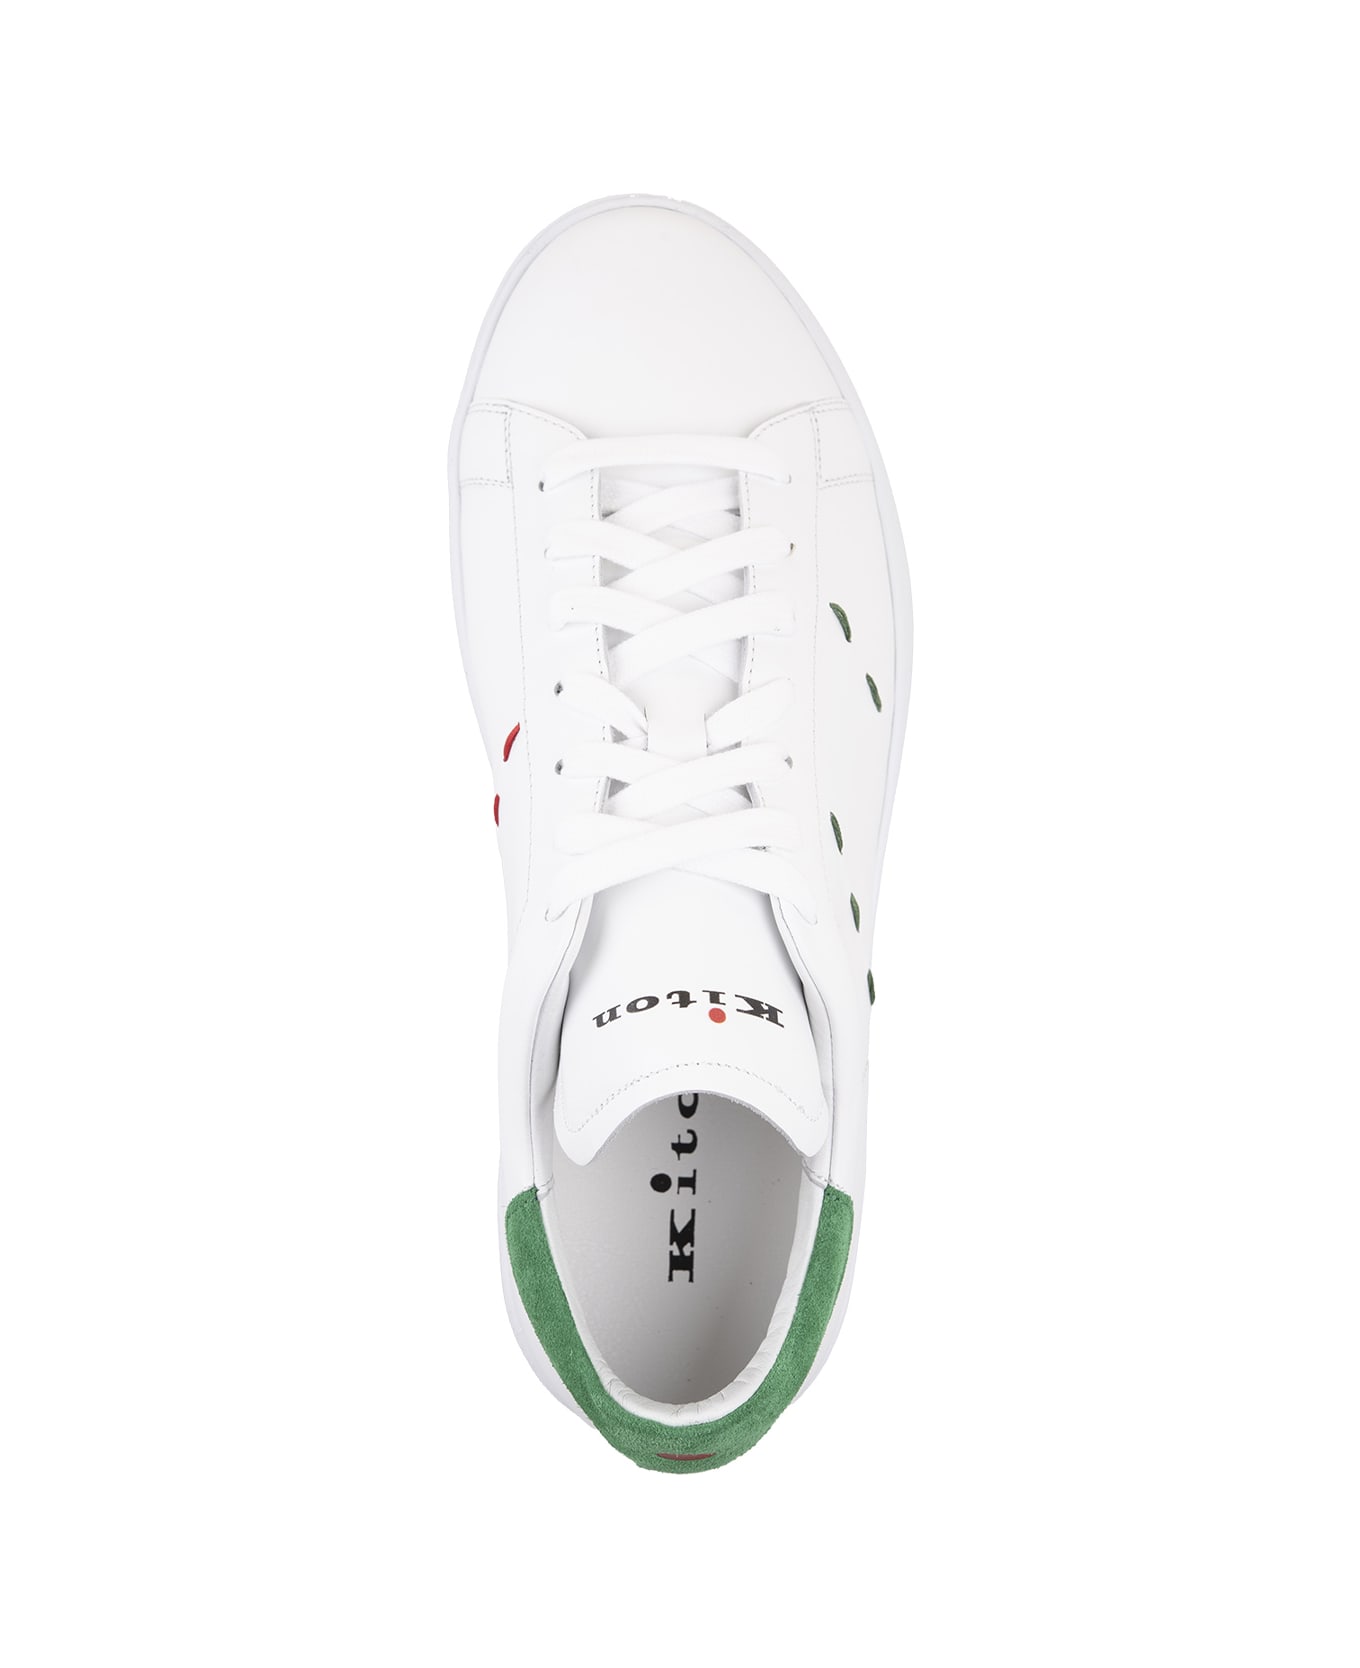 Kiton White Leather Sneakers With Green Details - Green